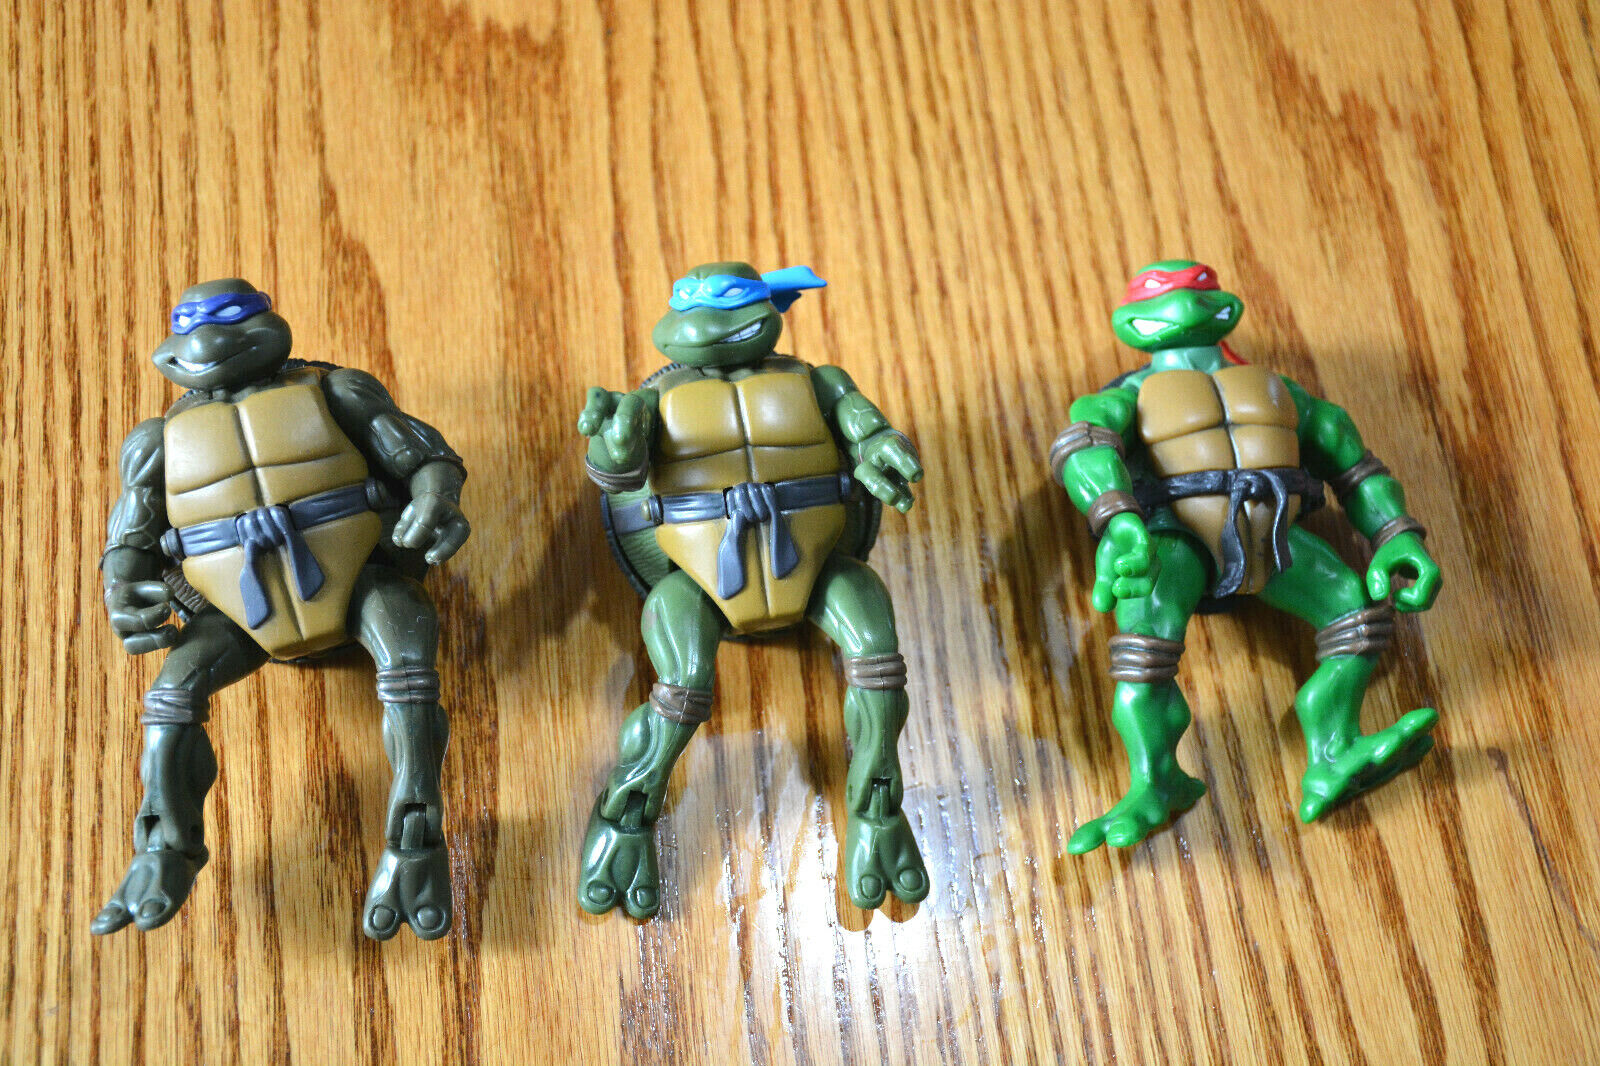 Lot of 3 Mirage Studios TMNT 2002 2003 5" Action Figure Toys: Red, Blue, Purple